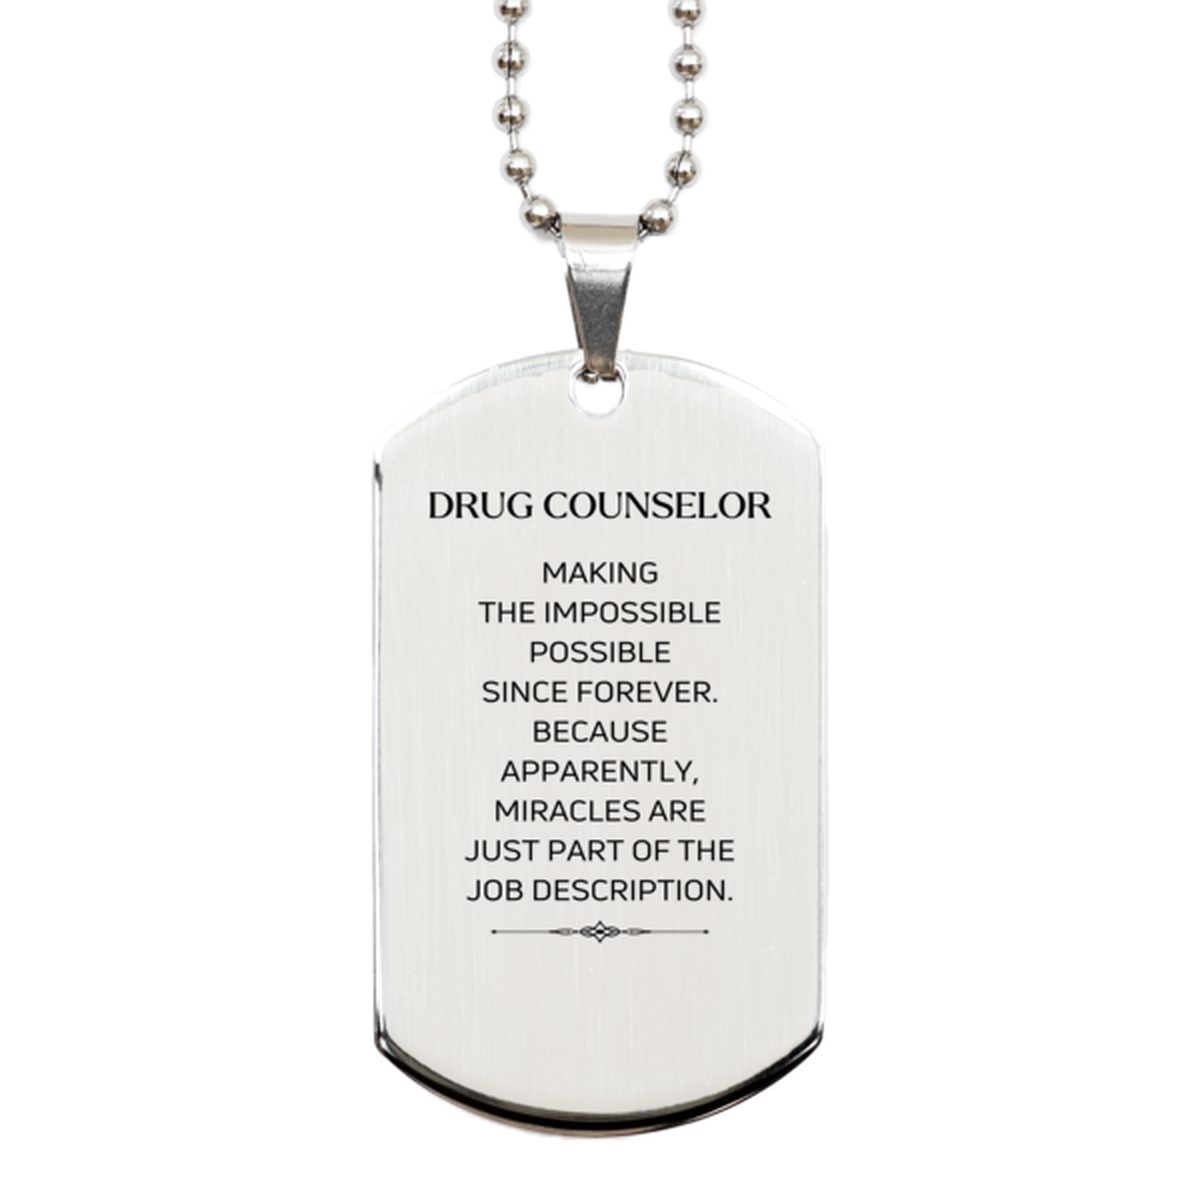 Funny Drug Counselor Gifts, Miracles are just part of the job description, Inspirational Birthday Silver Dog Tag For Drug Counselor, Men, Women, Coworkers, Friends, Boss